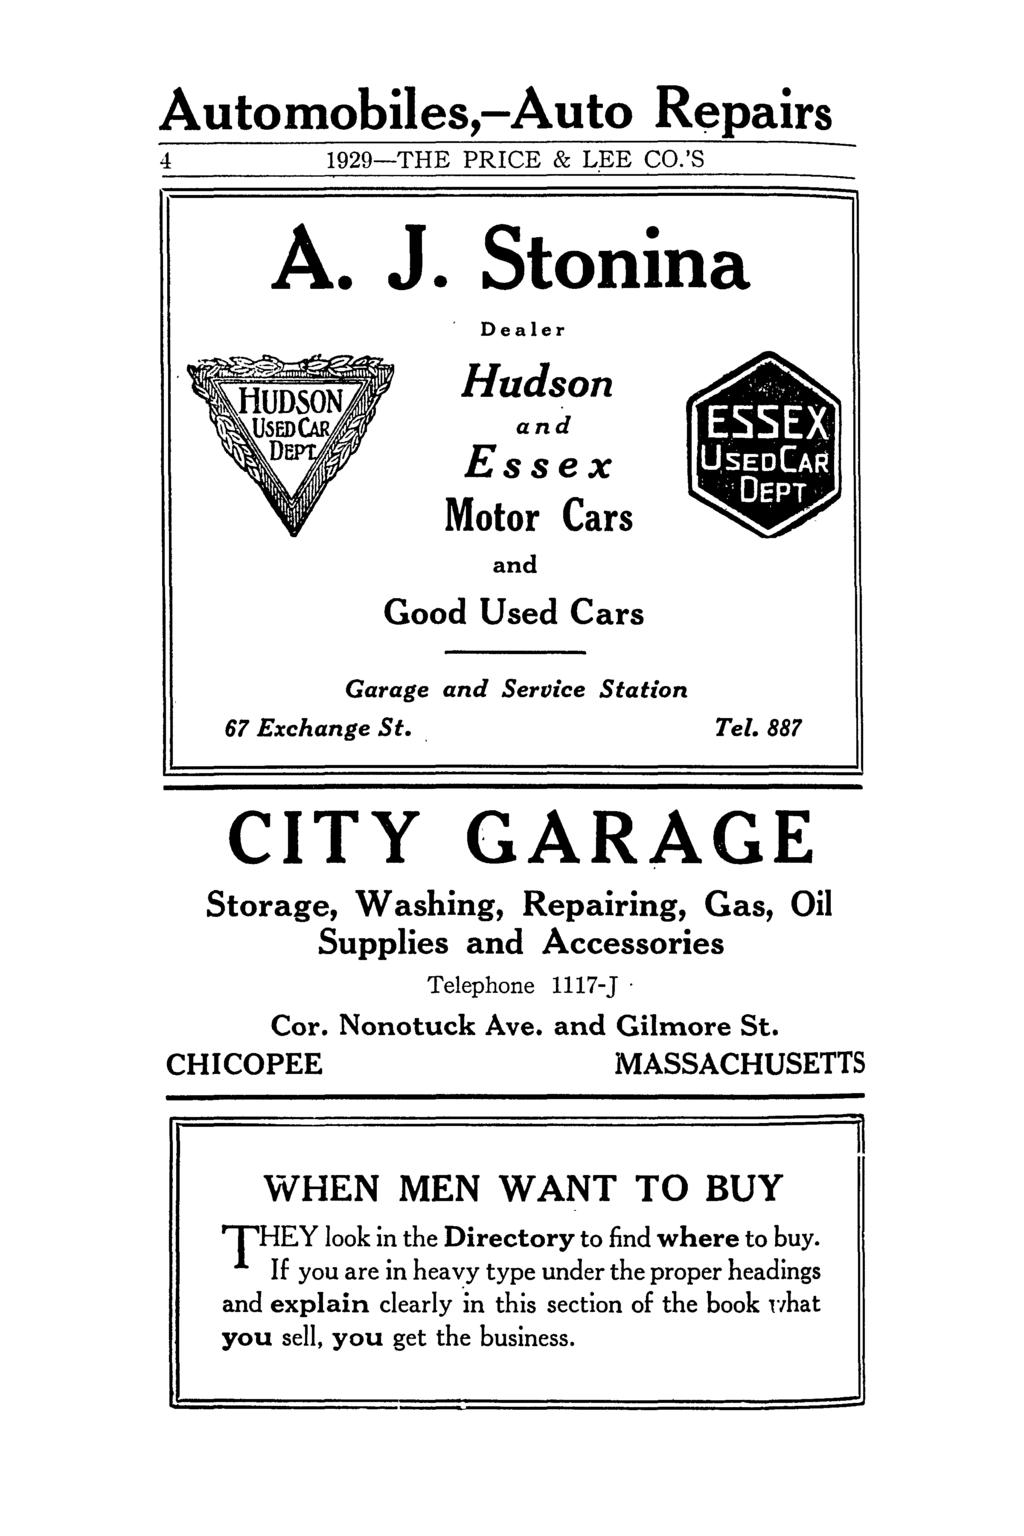 Autolllobiles,-Auto Repairs 4 1929-THE PRICE & L;EE CO.'S A. J. Stonina Dealer Hudson and Essex Motor Cars and Good Used Cars Garage and Service Station 67 Exchange St., Tel.